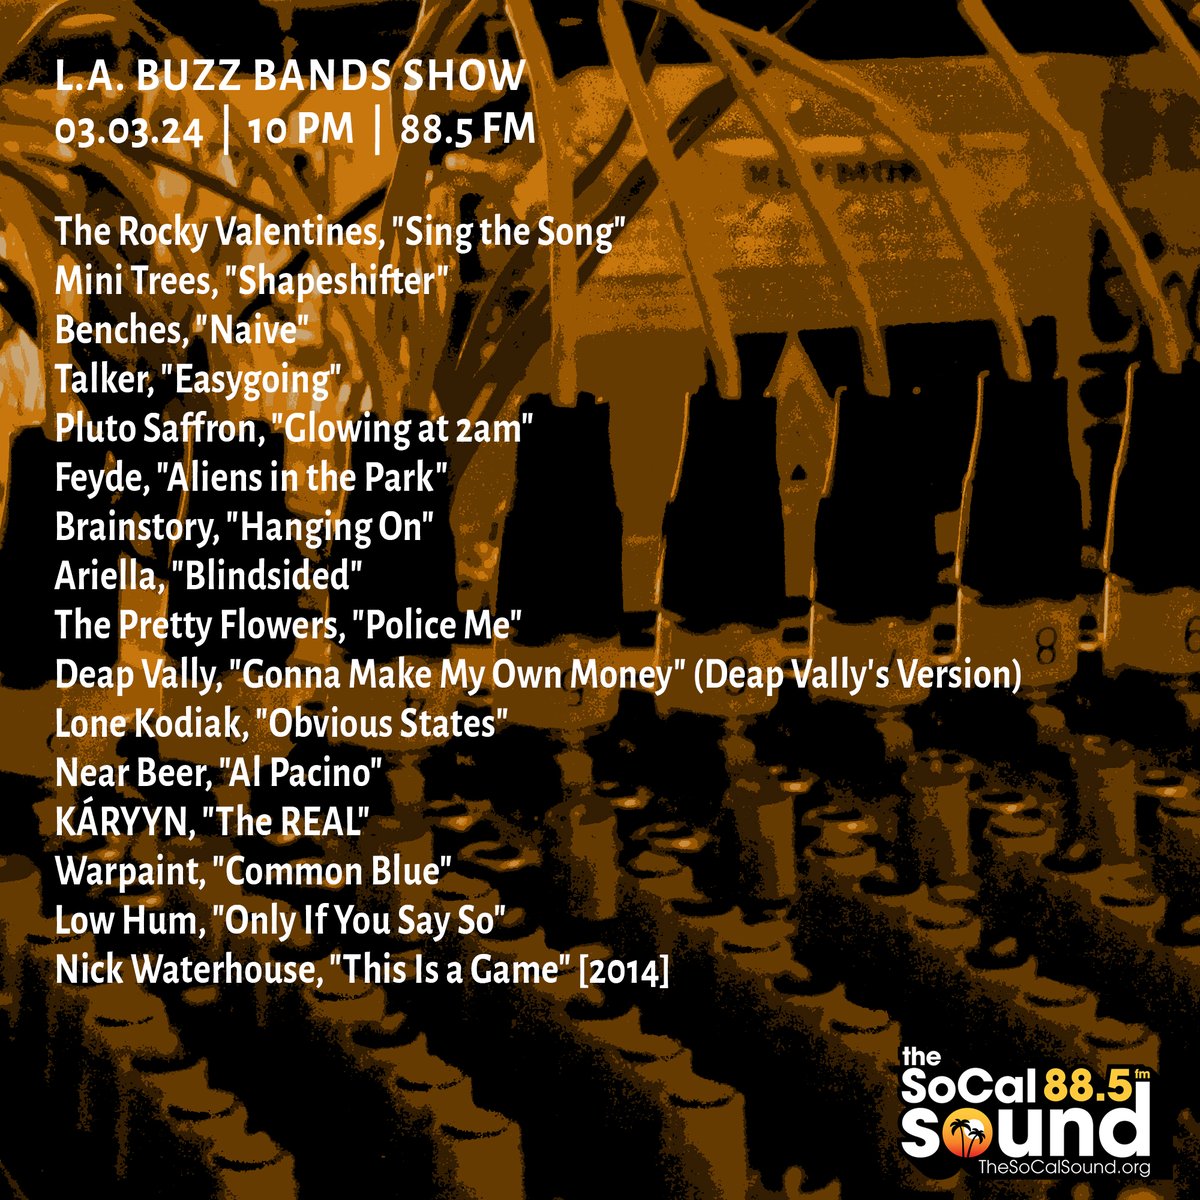 Coming at 10PM: @buzzbandsla Show on 88.5 FM @TheSoCalSound, ft. music from the Rocky Valentines, Ariella, Near Beer, Feyde, Pluto Saffron, the Pretty Flowers, Brainstory, Warpaint, Benches, Lone Kodiak, Mini Trees, Deep Vally, Talker and more ... Tune in! bit.ly/3ImtzaA